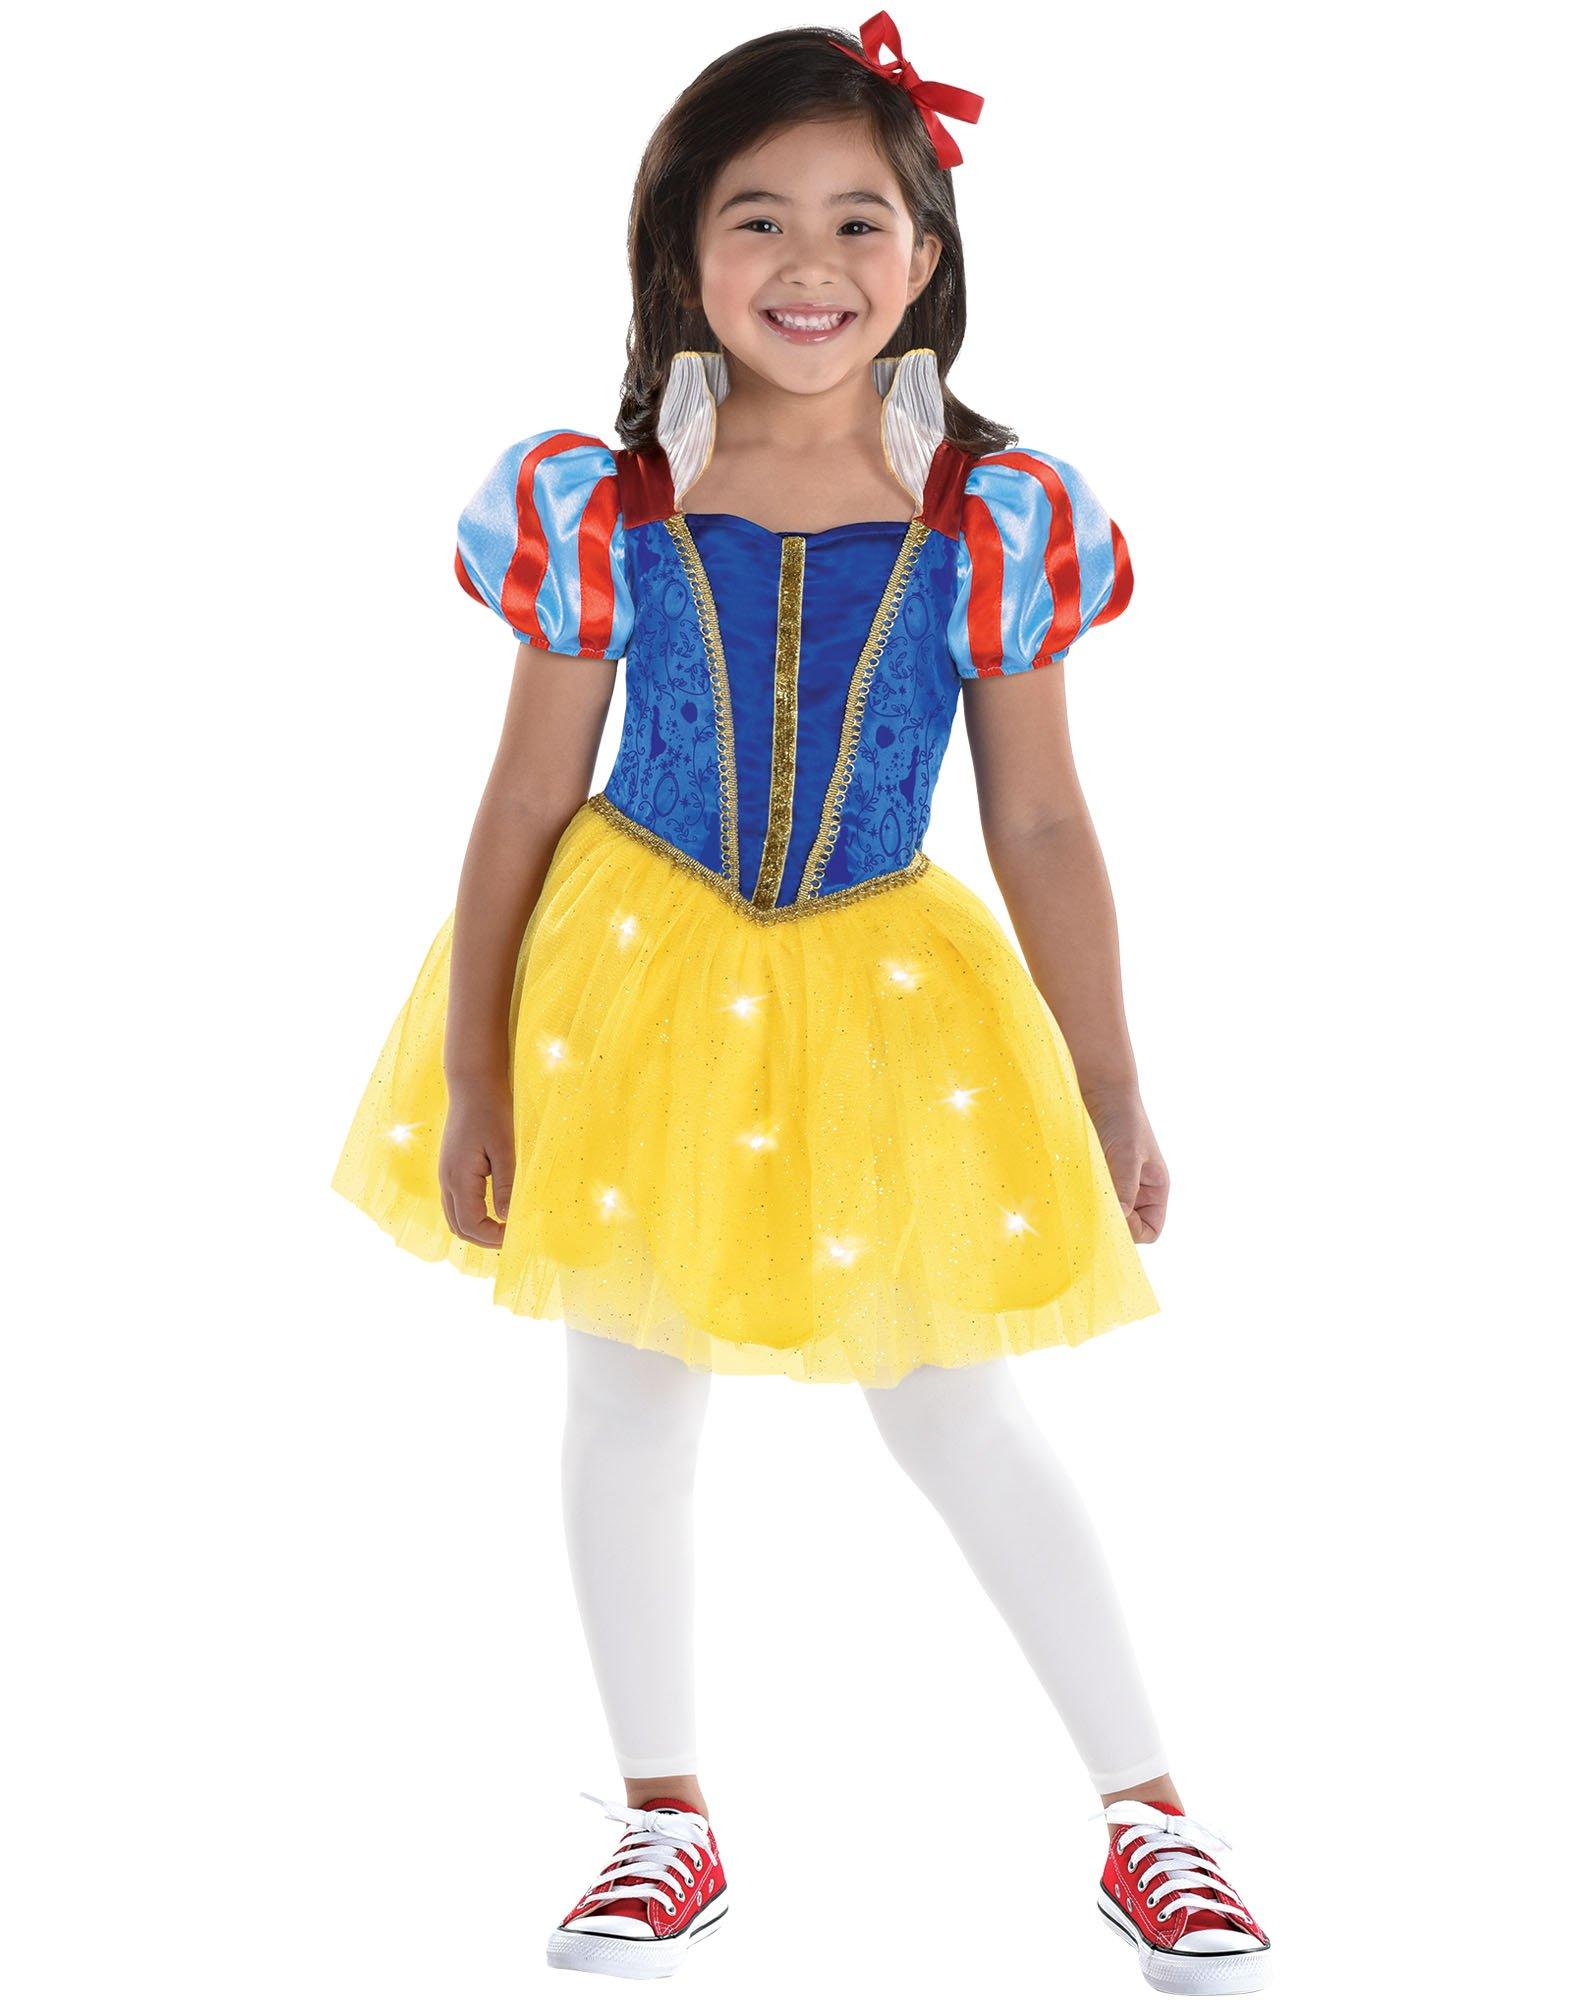 Snow White Costume For Kids, Snow White and the Seven Dwarfs